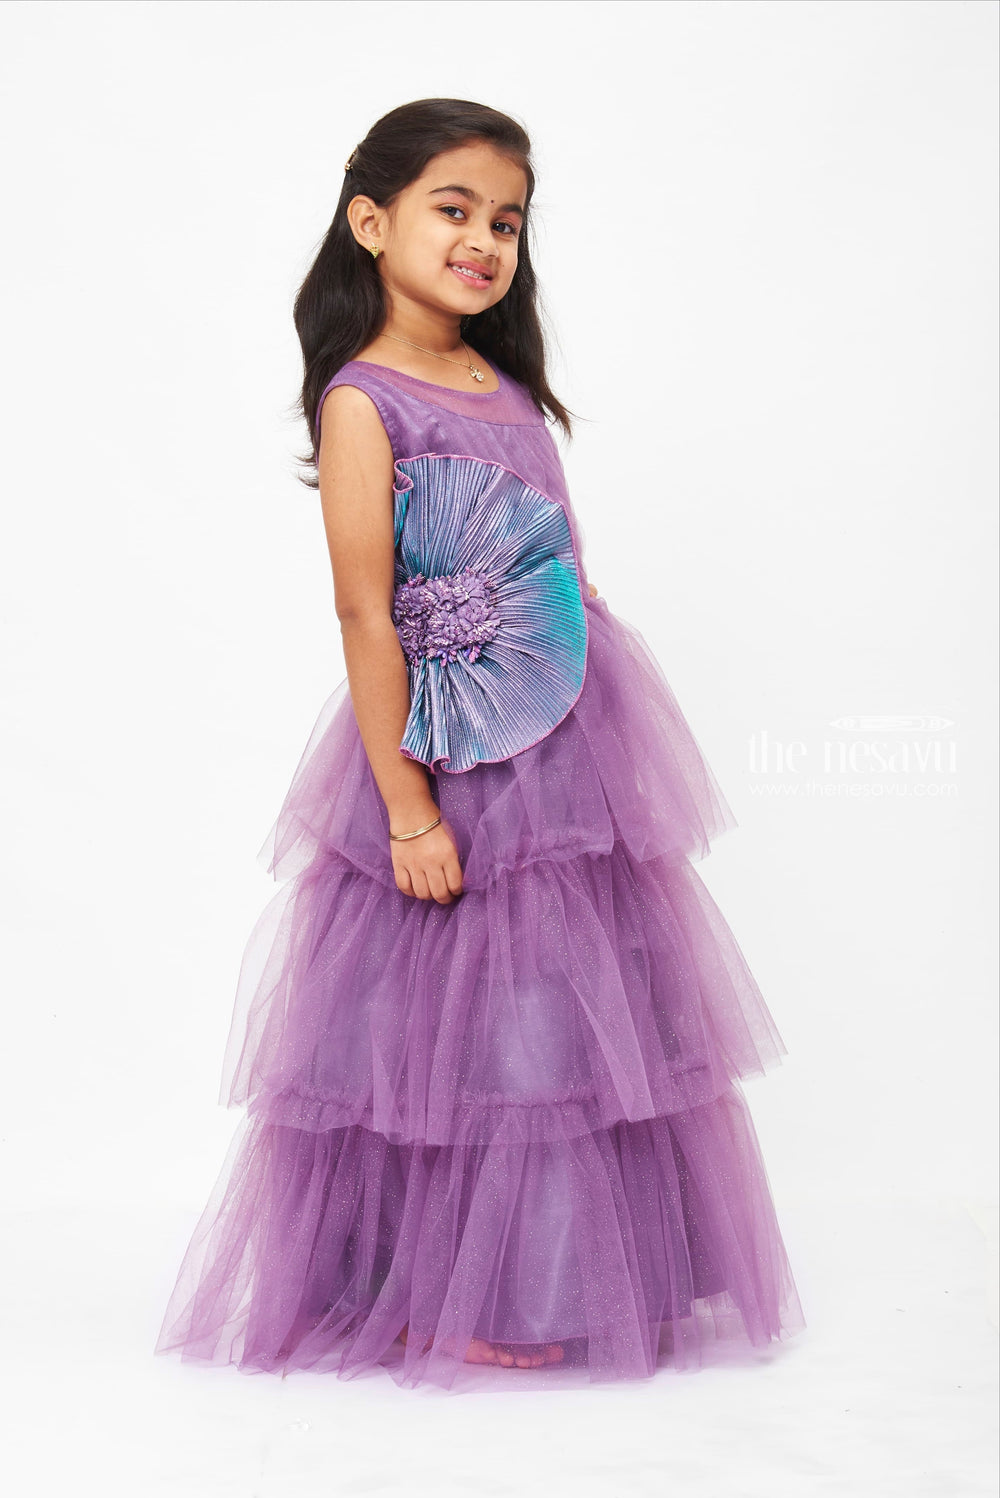 The Nesavu Girls Party Gown Luxurious Twilight Purple Party Gown with Embellished Pleated Fan Detail Nesavu Twilight Purple Party Gown | Embellished Pleated Evening Dress Online | The Nesavu